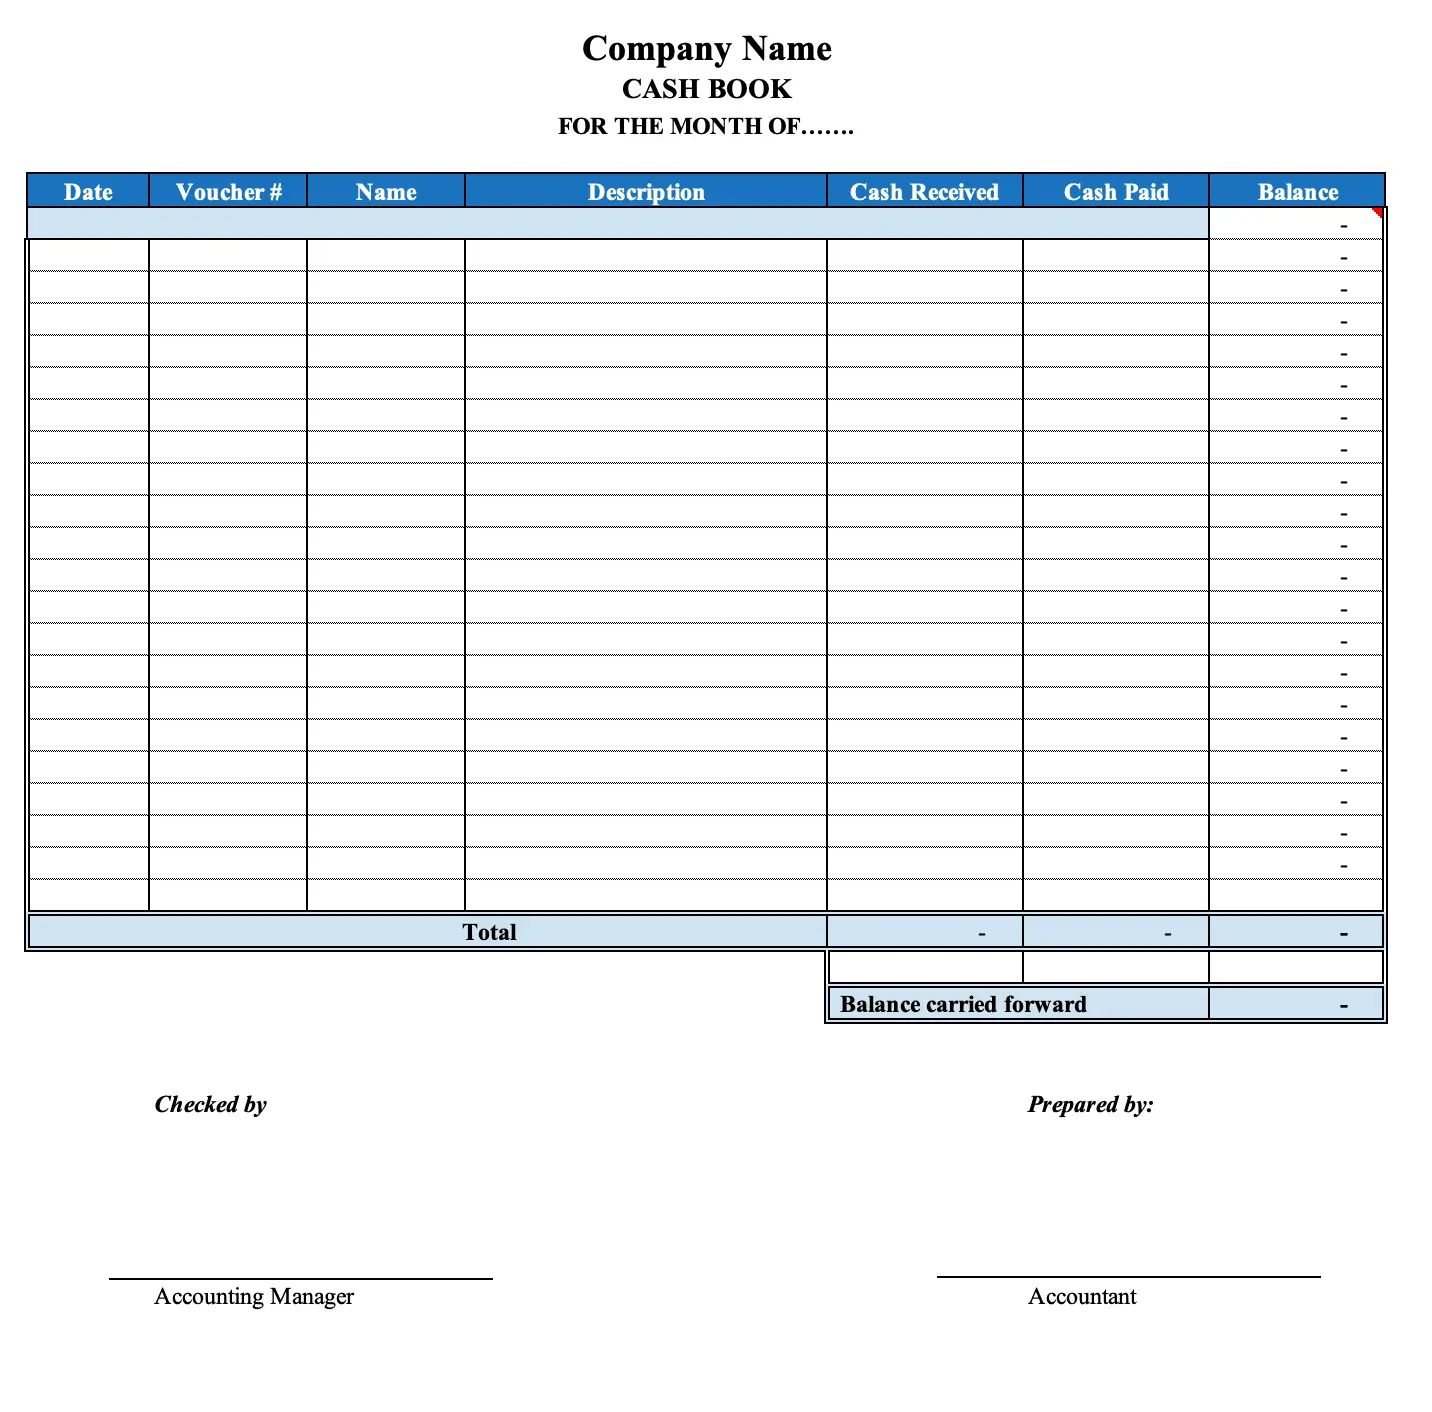 Petty Cash Book  Journal Entry  Example  Template - Accountinguide Pertaining To Petty Cash Expense Report Template